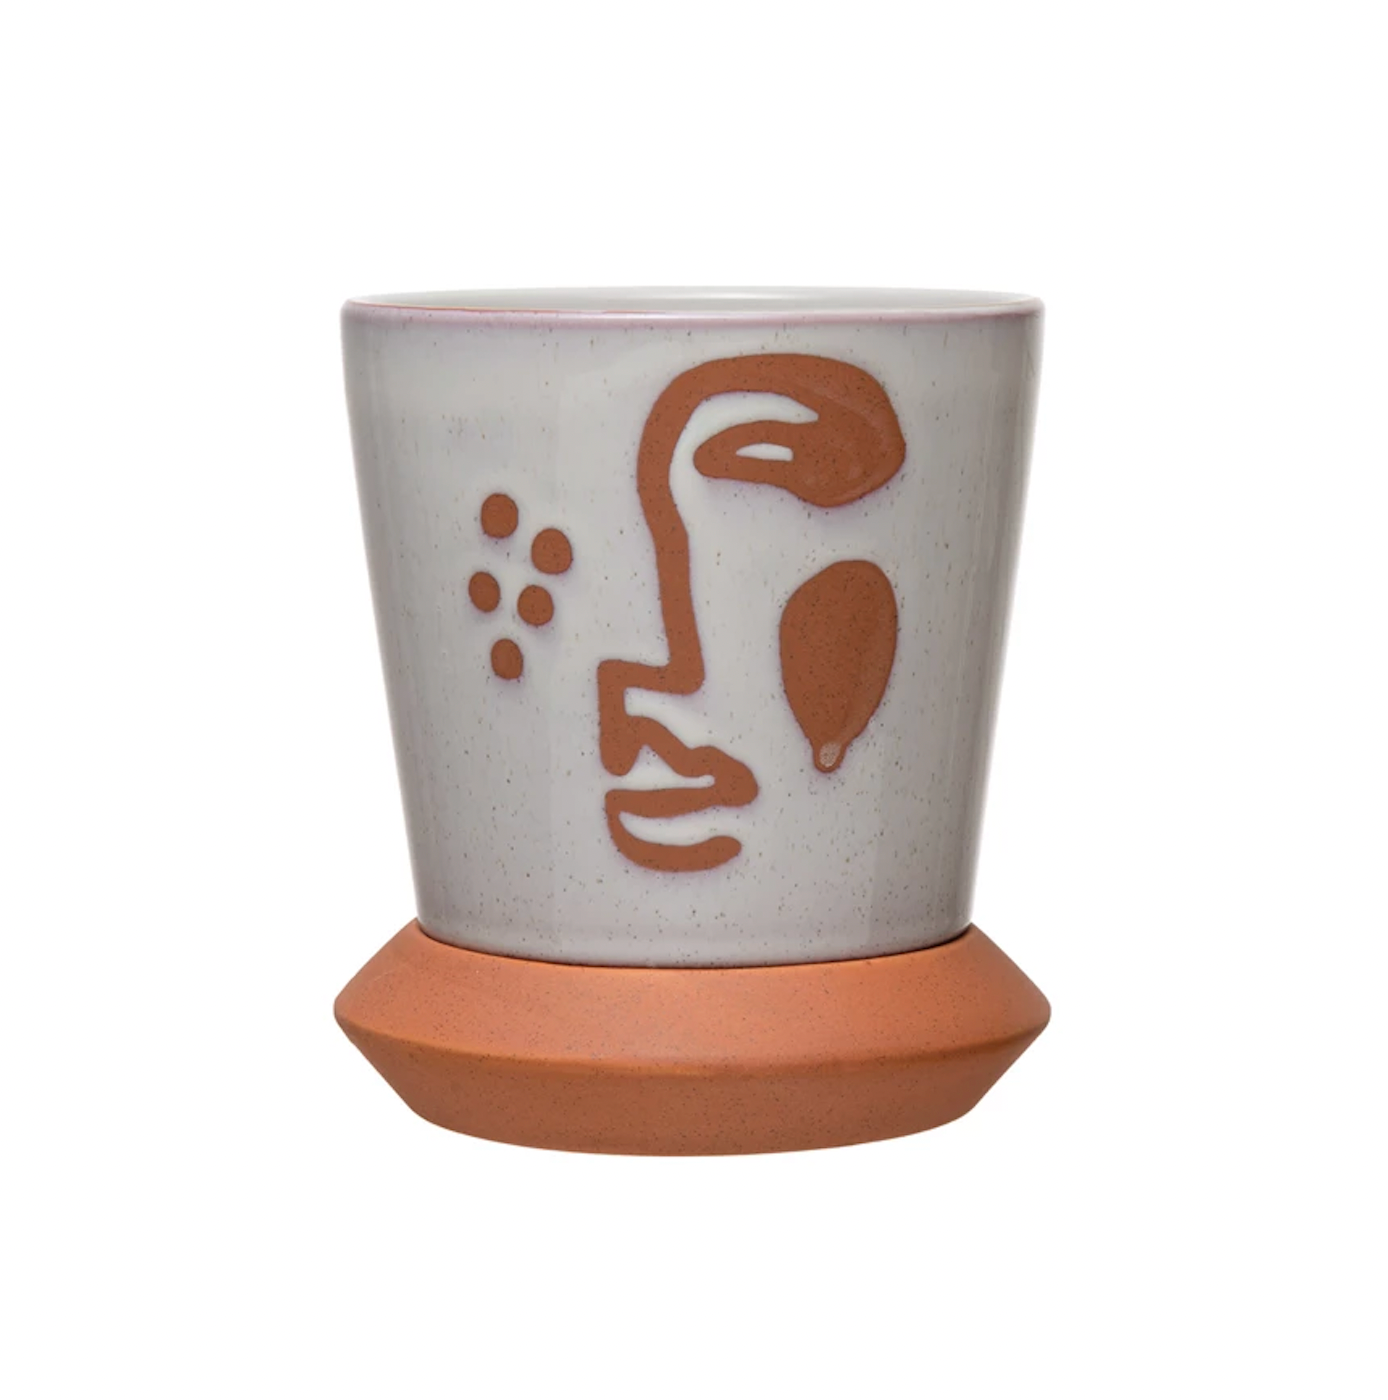 White Terra-Cotta Face Planter with Saucer